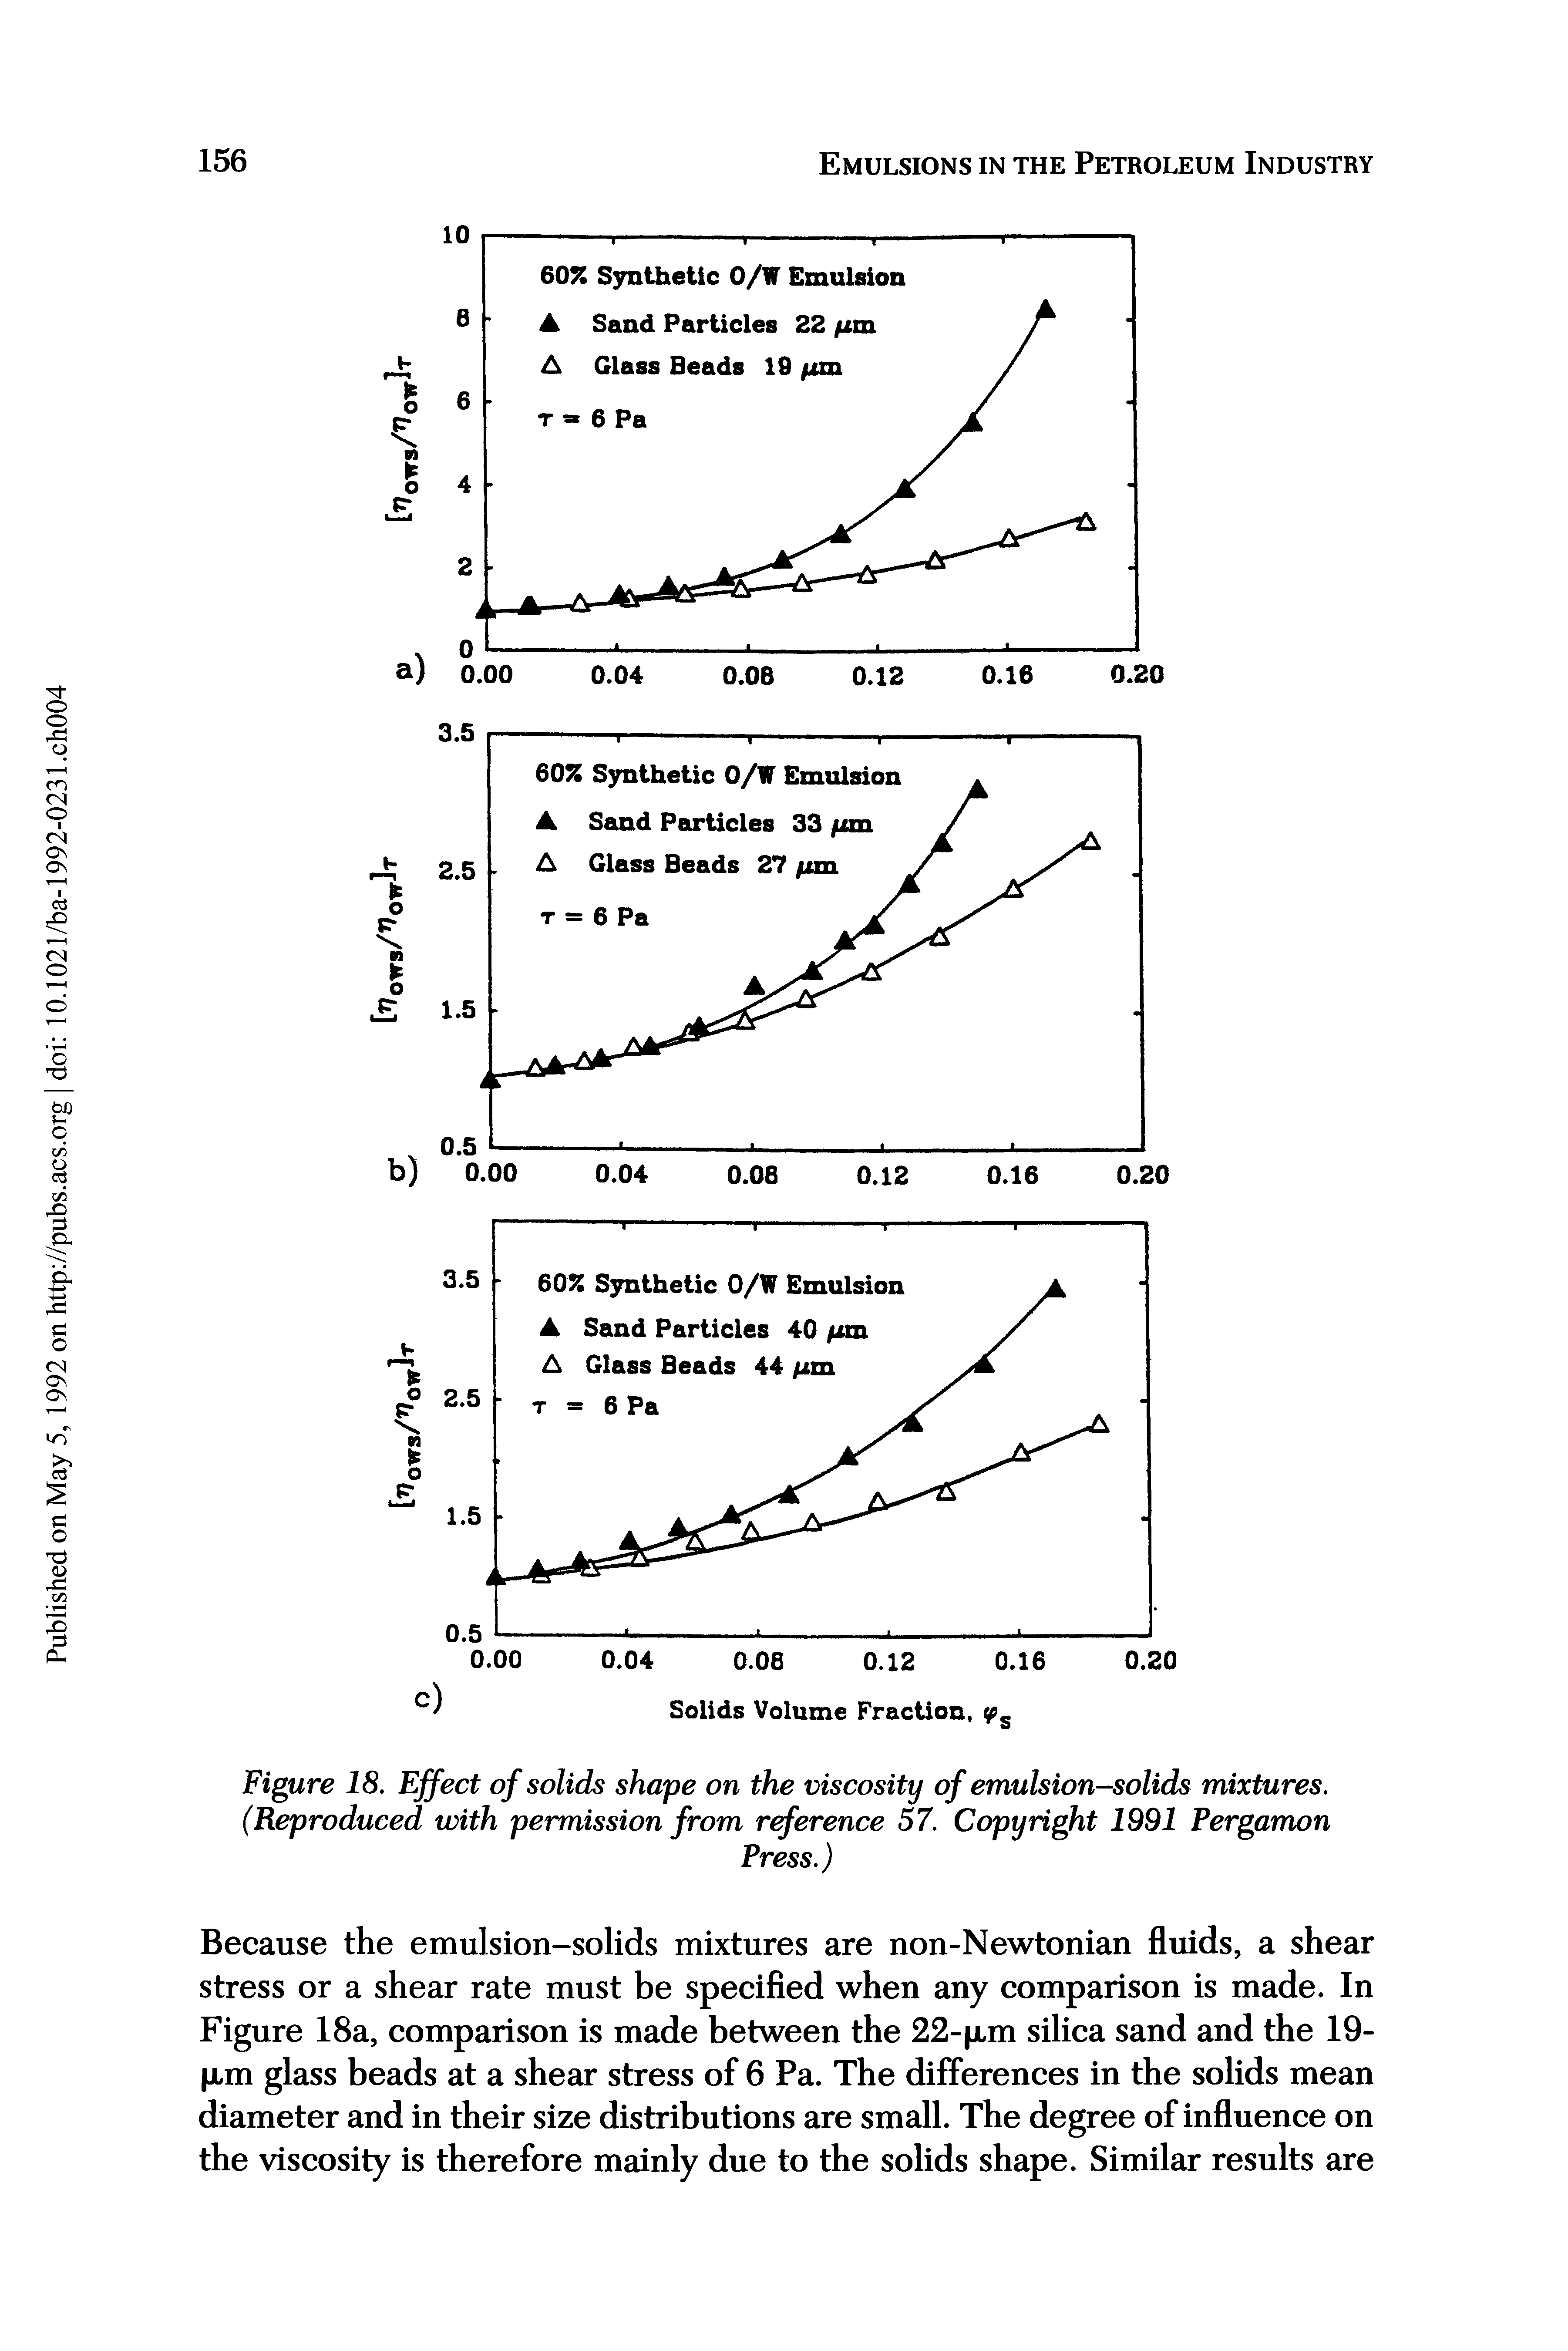 Figure 18. Effect of solids shape on the viscosity of emulsion-solids mixtures. (Reproduced with permission from reference 57. Copyright 1991 Pergamon...